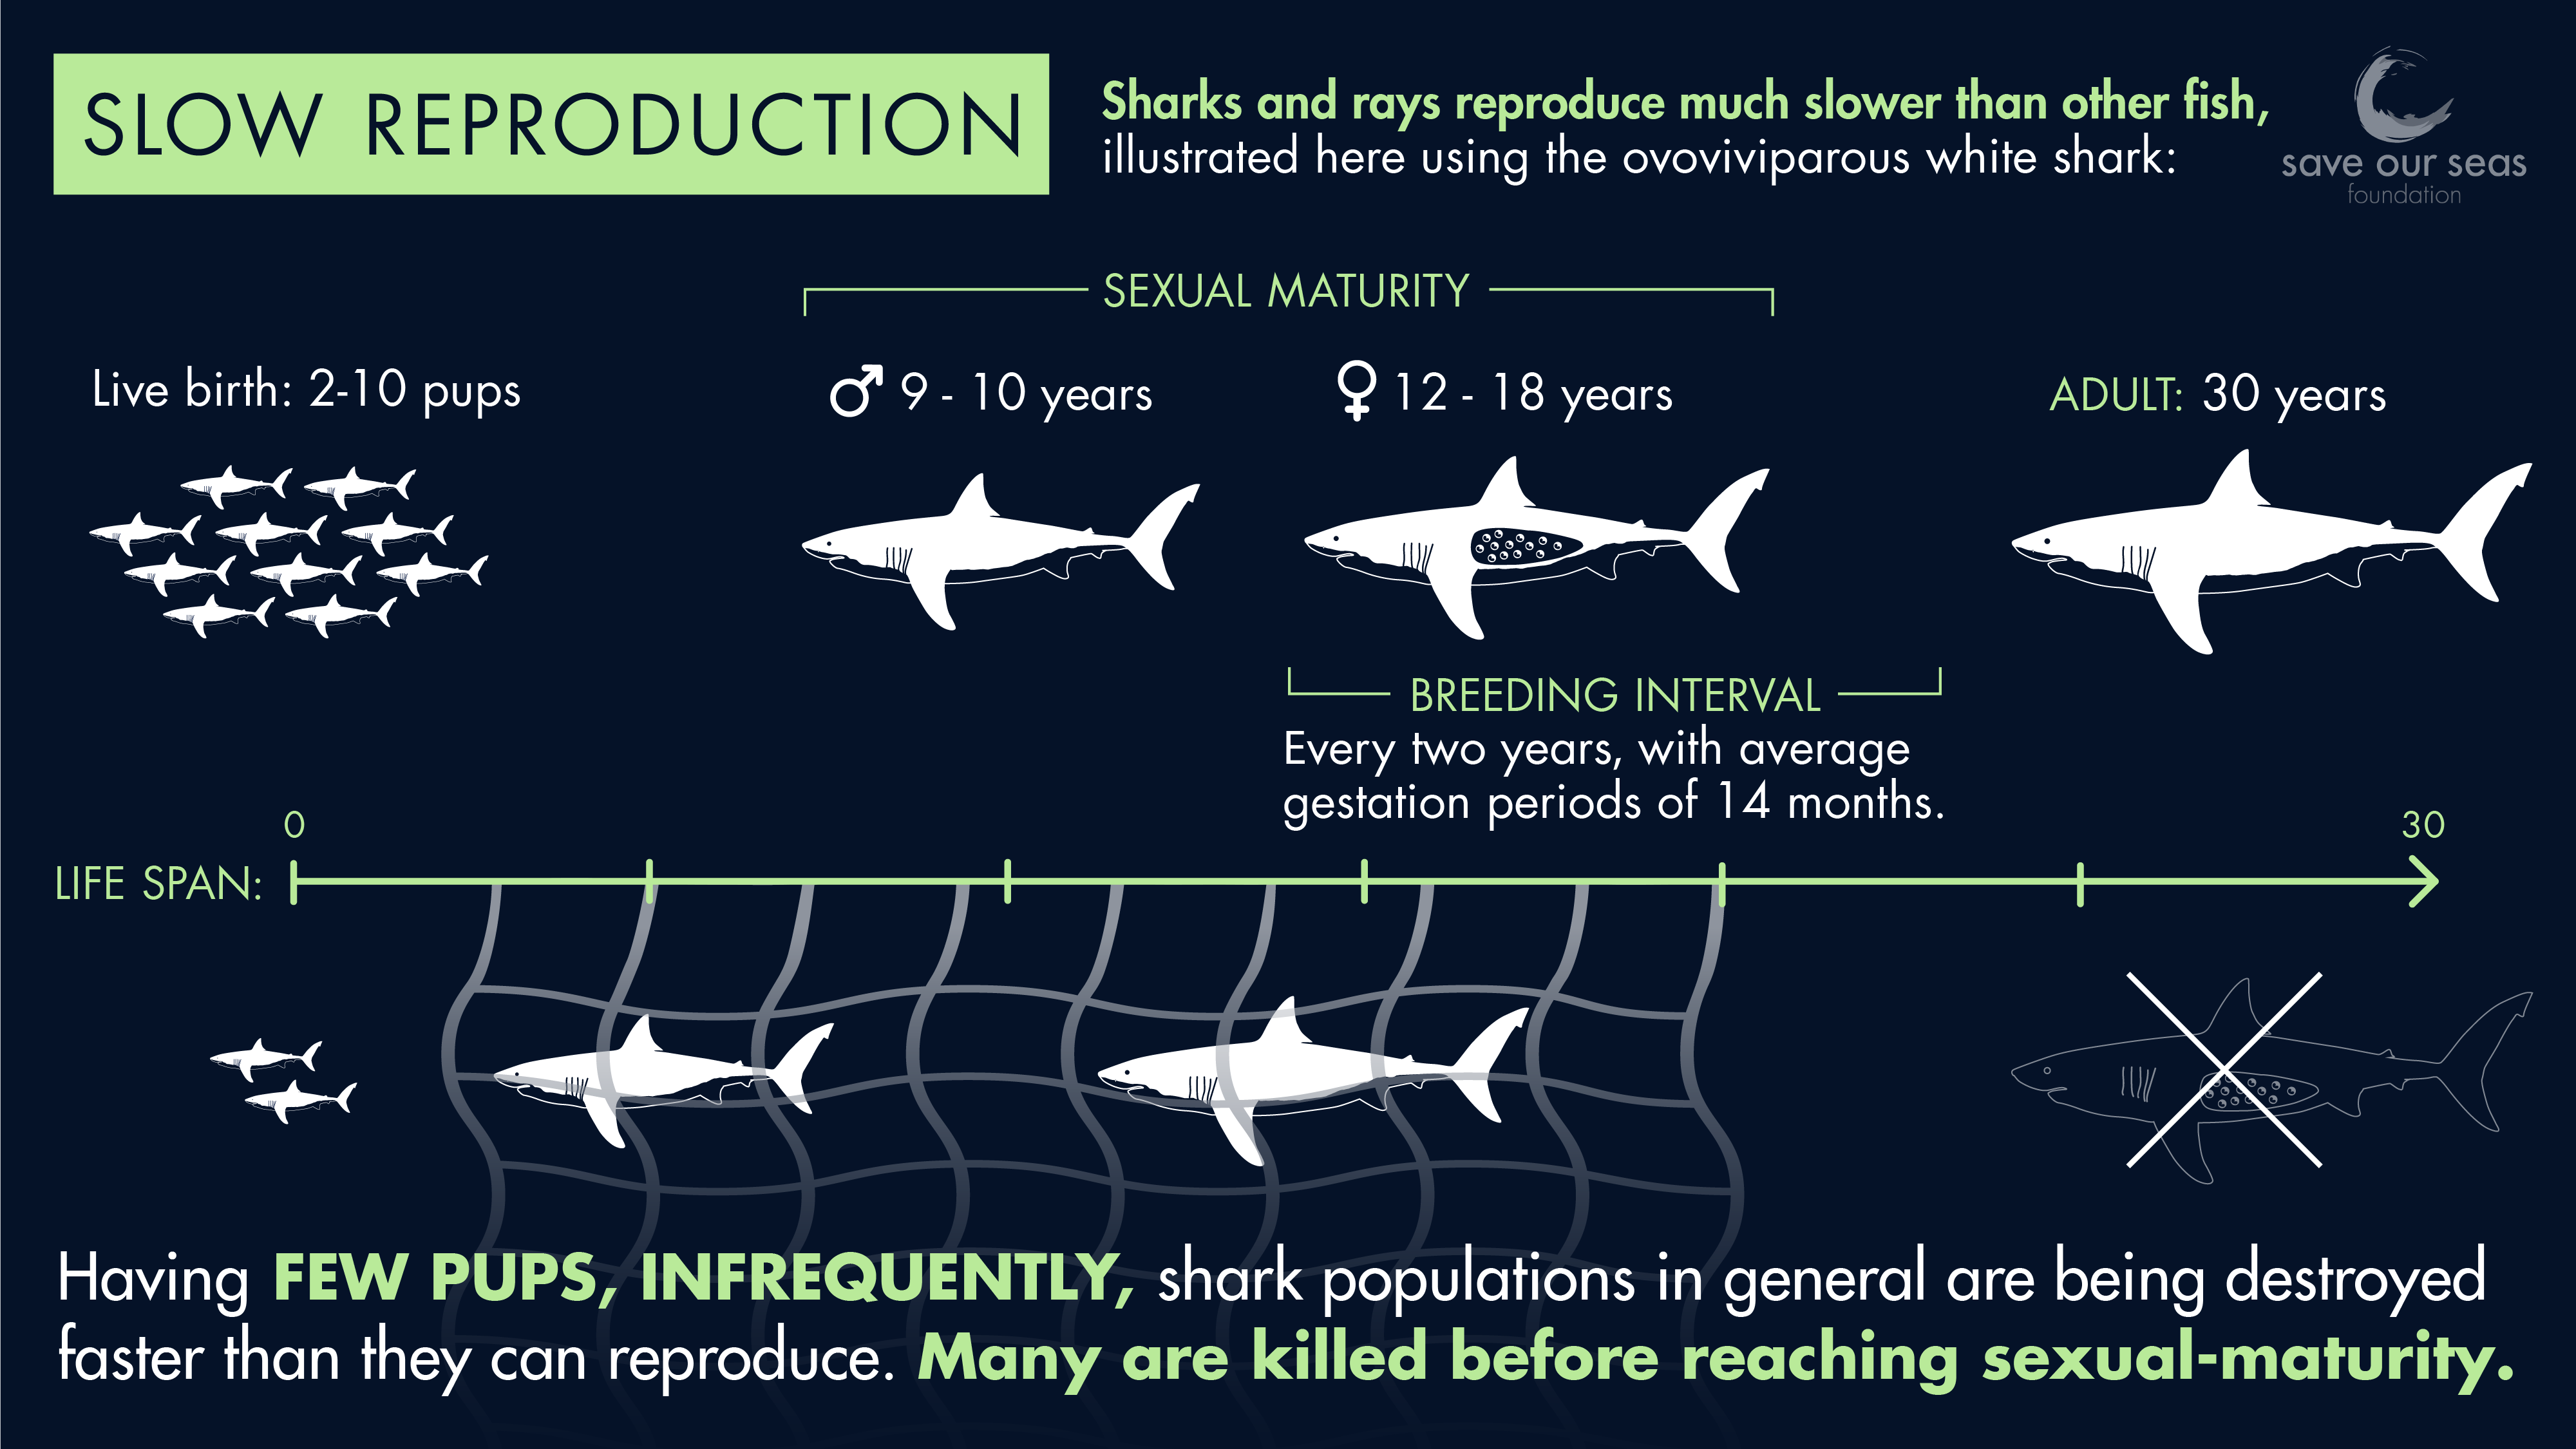 What shark has the shortest gestation period?